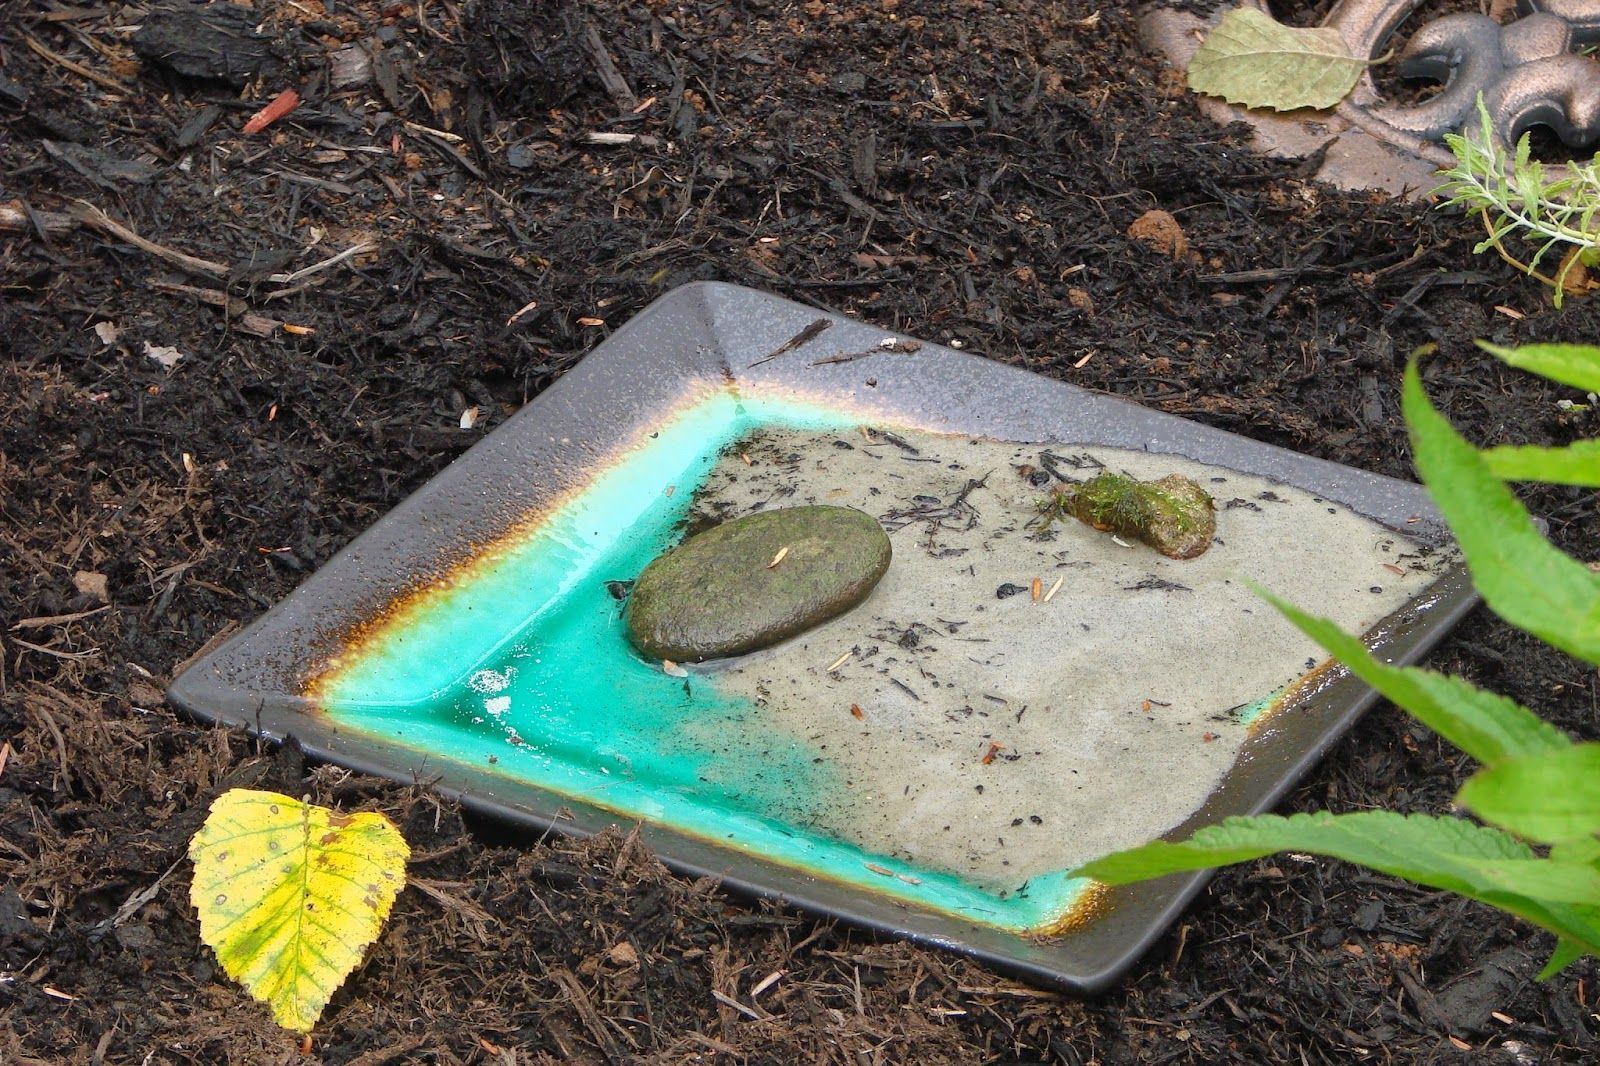 butterfly puddling station made with sand and dish